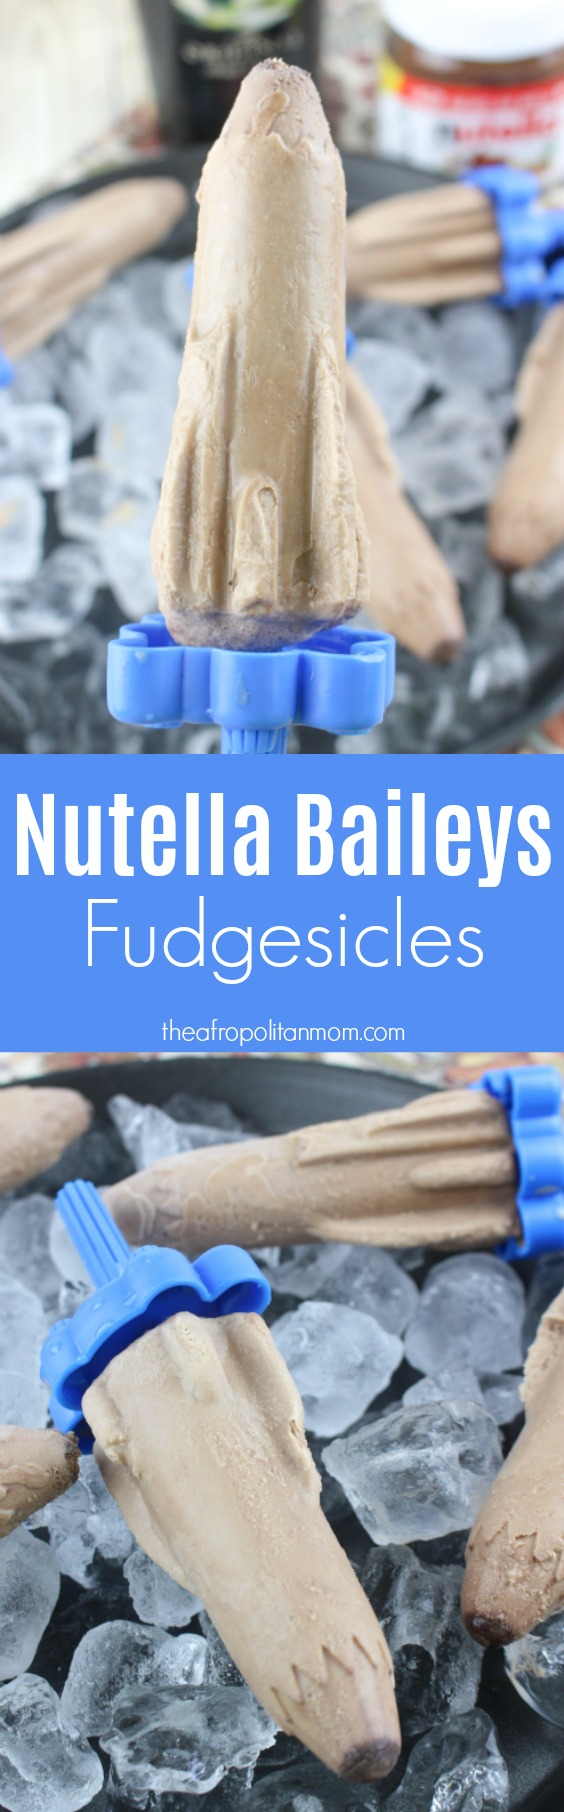 Homemade Nutella Baileys Fudgesicles, creamy, delicious and tasty summer treats using only 4 ingredients. It's perfect for cooling off in this summer heat.